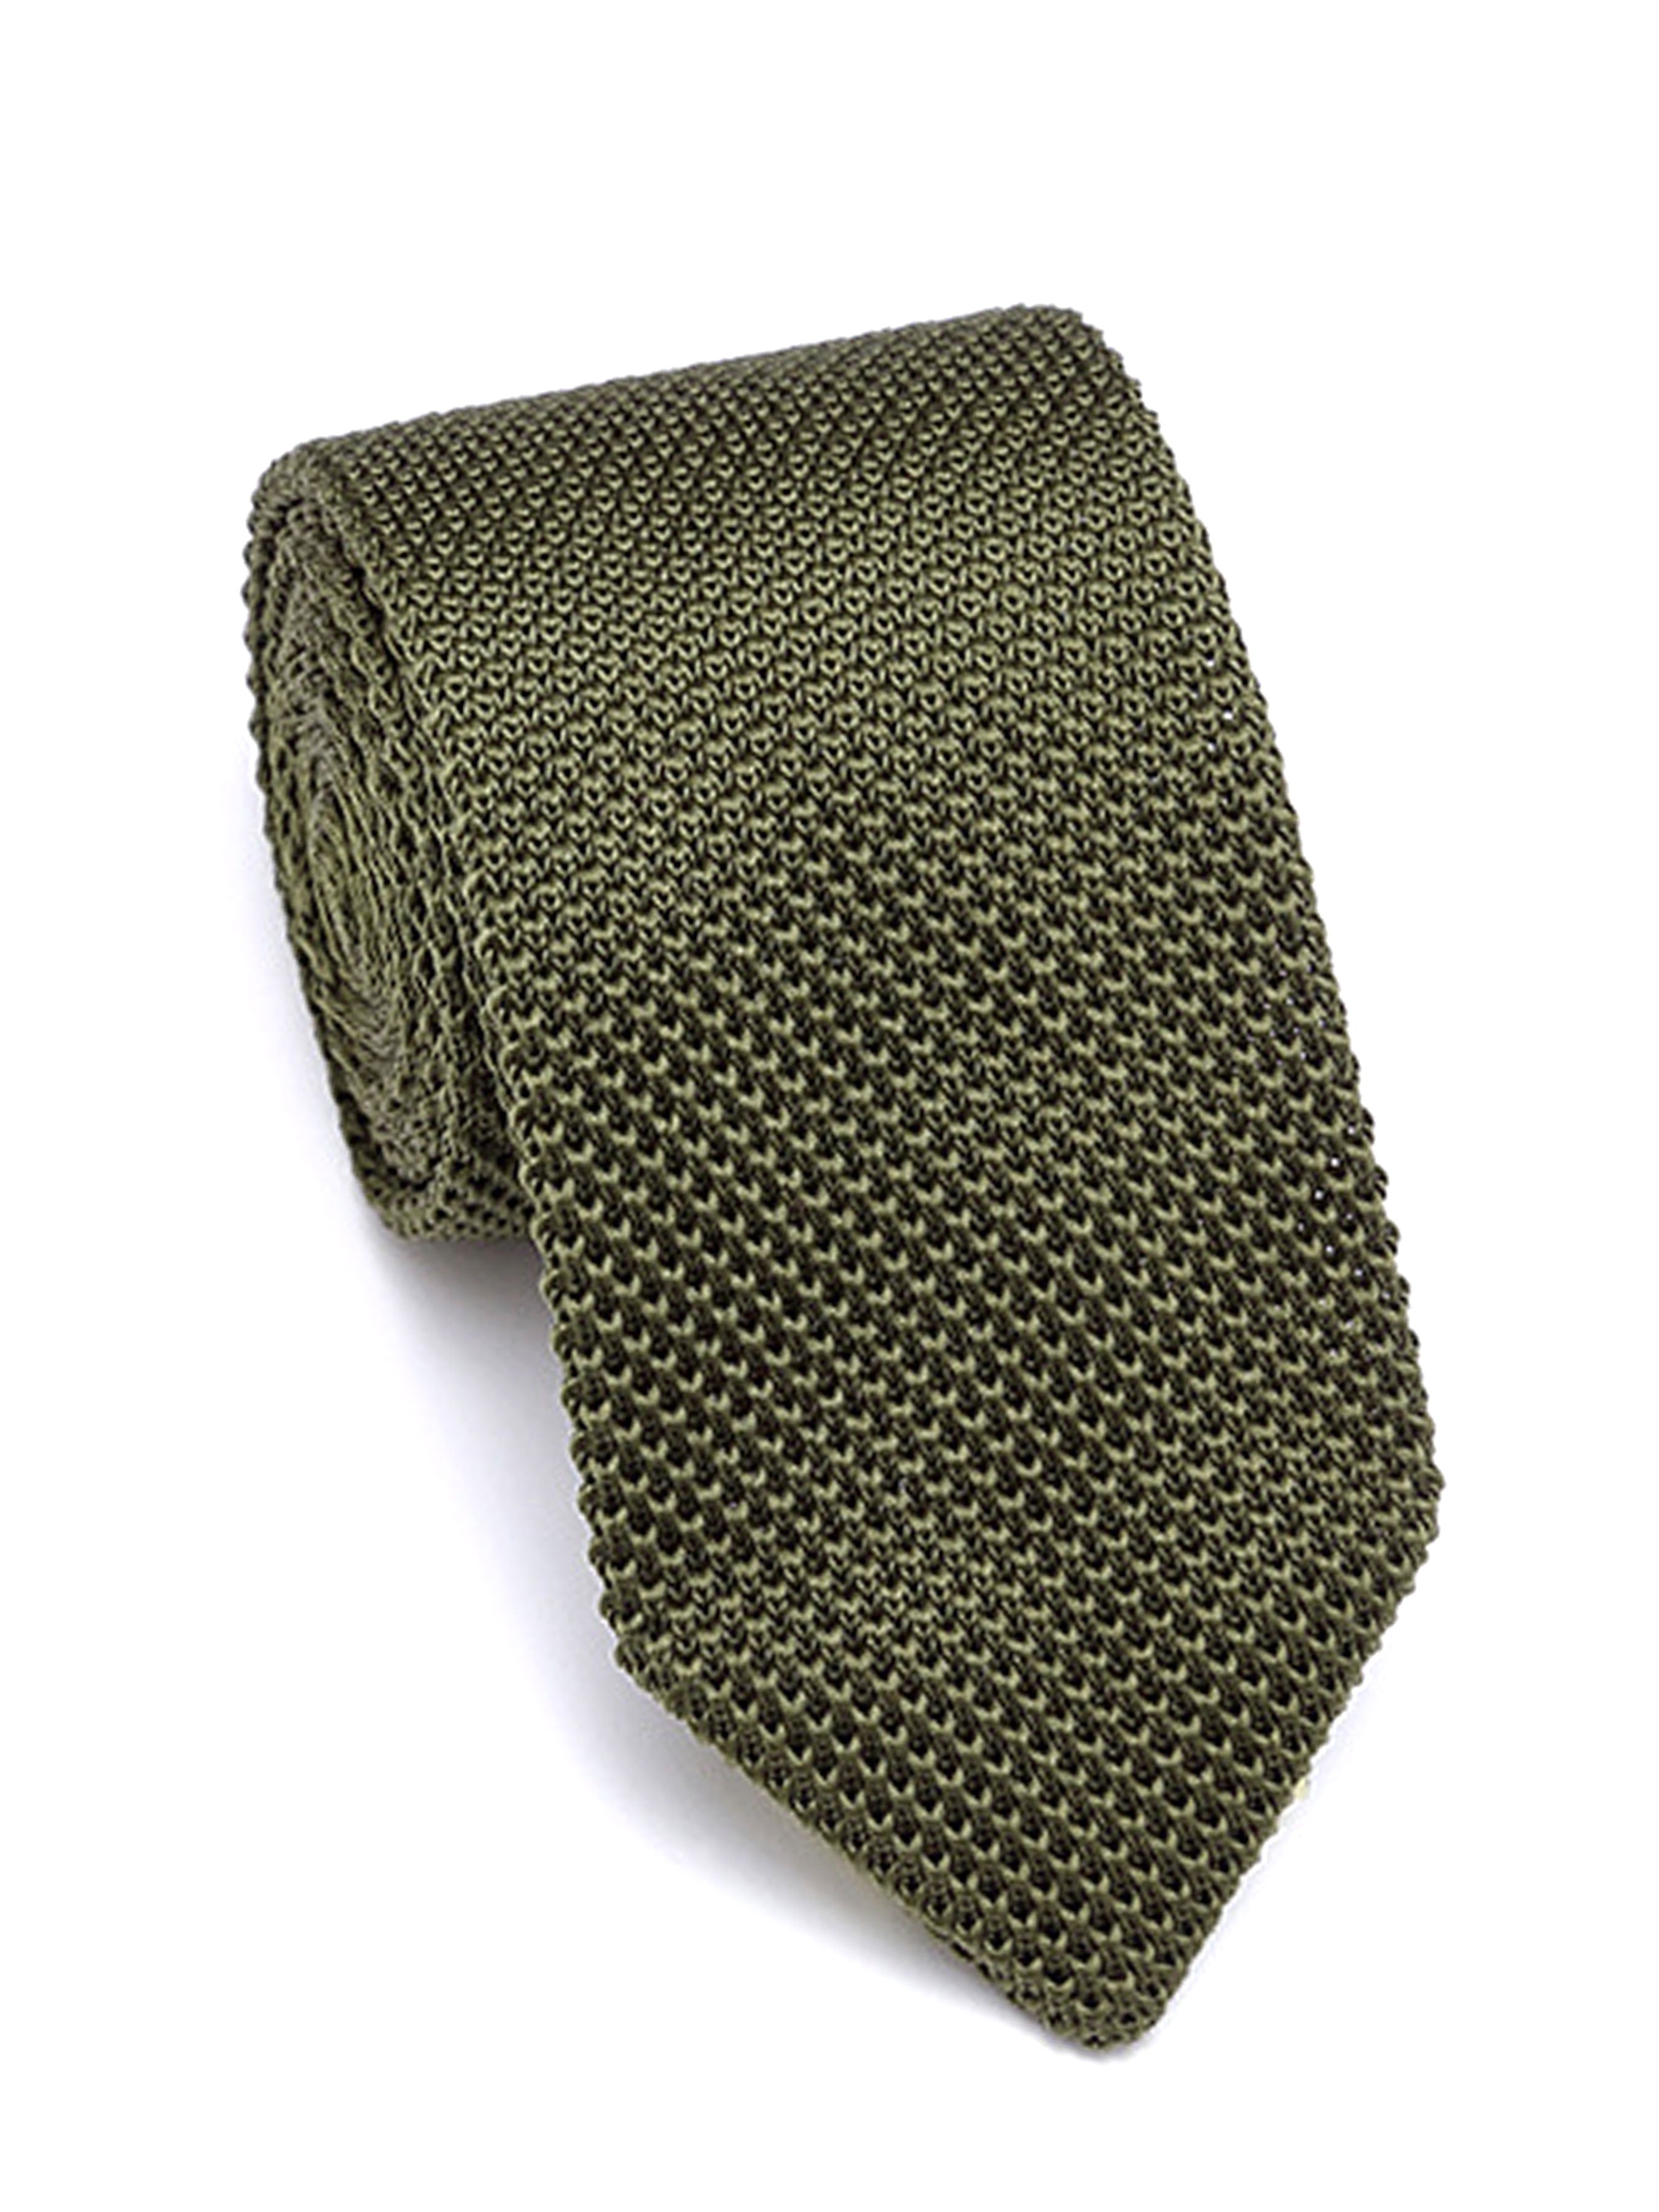 Knit Tie - Olive Green - Zeve Shoes